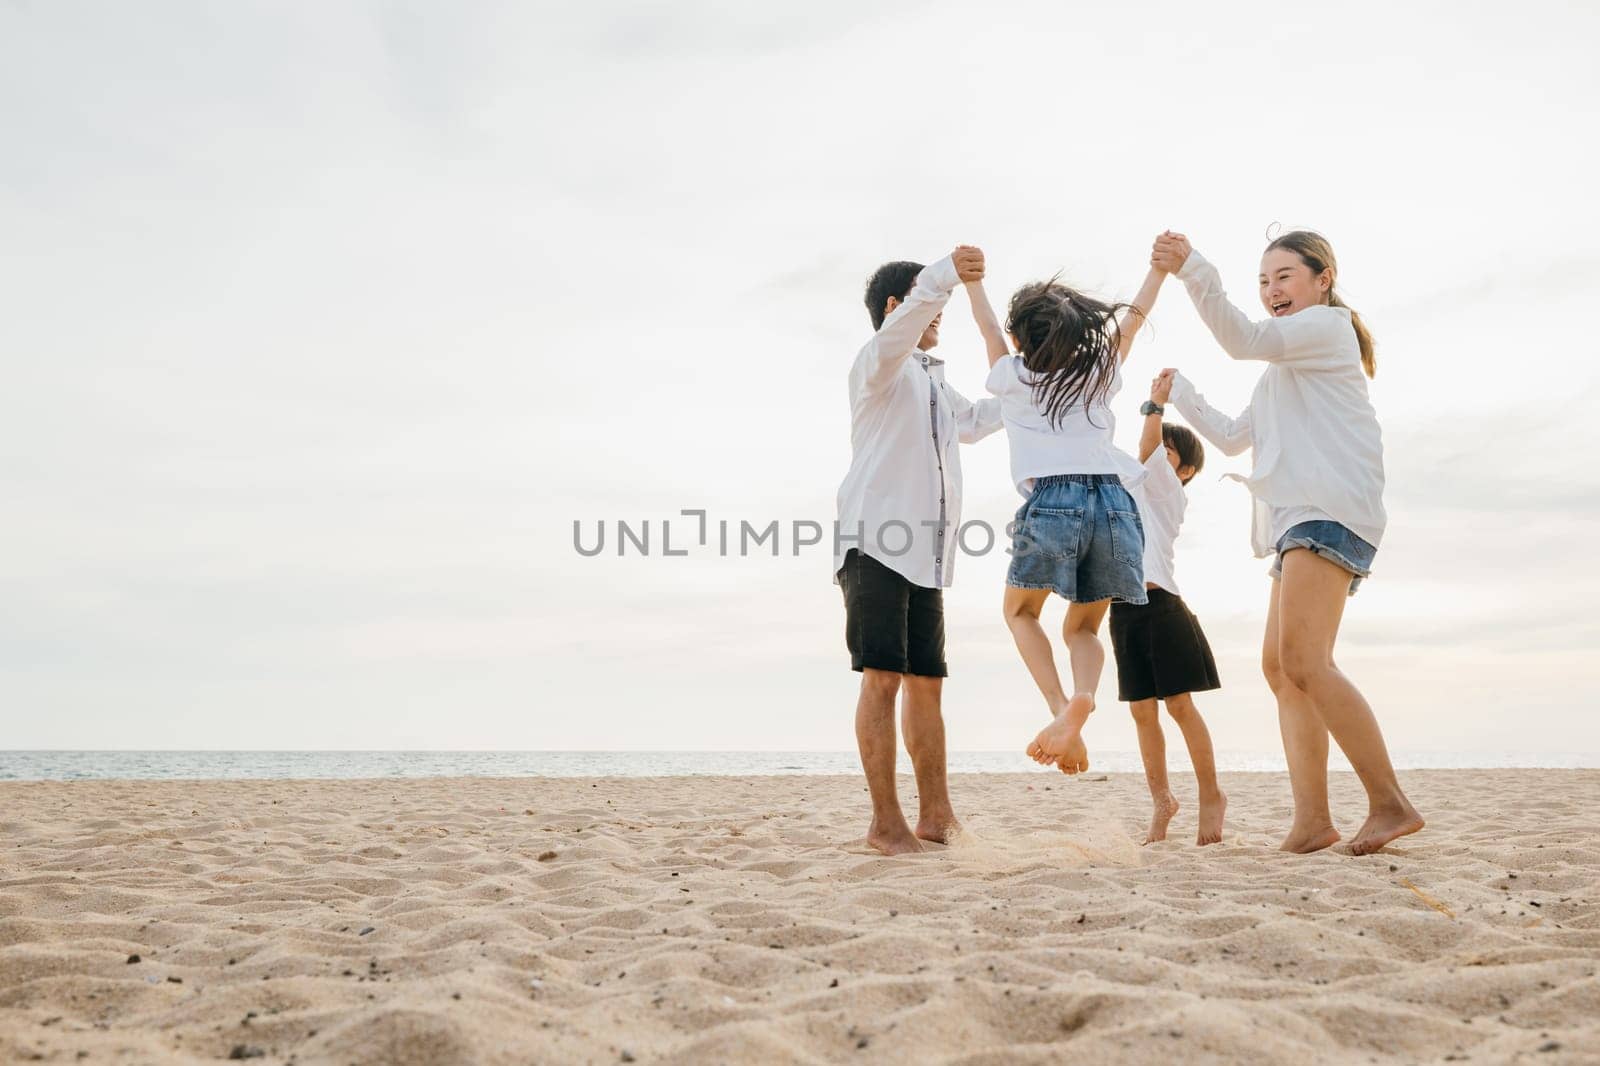 A burst of joy on beach as an Asian family father and mother holding children leaps into air. beautiful ocean provides serene setting for this delightful portrayal of family togetherness.